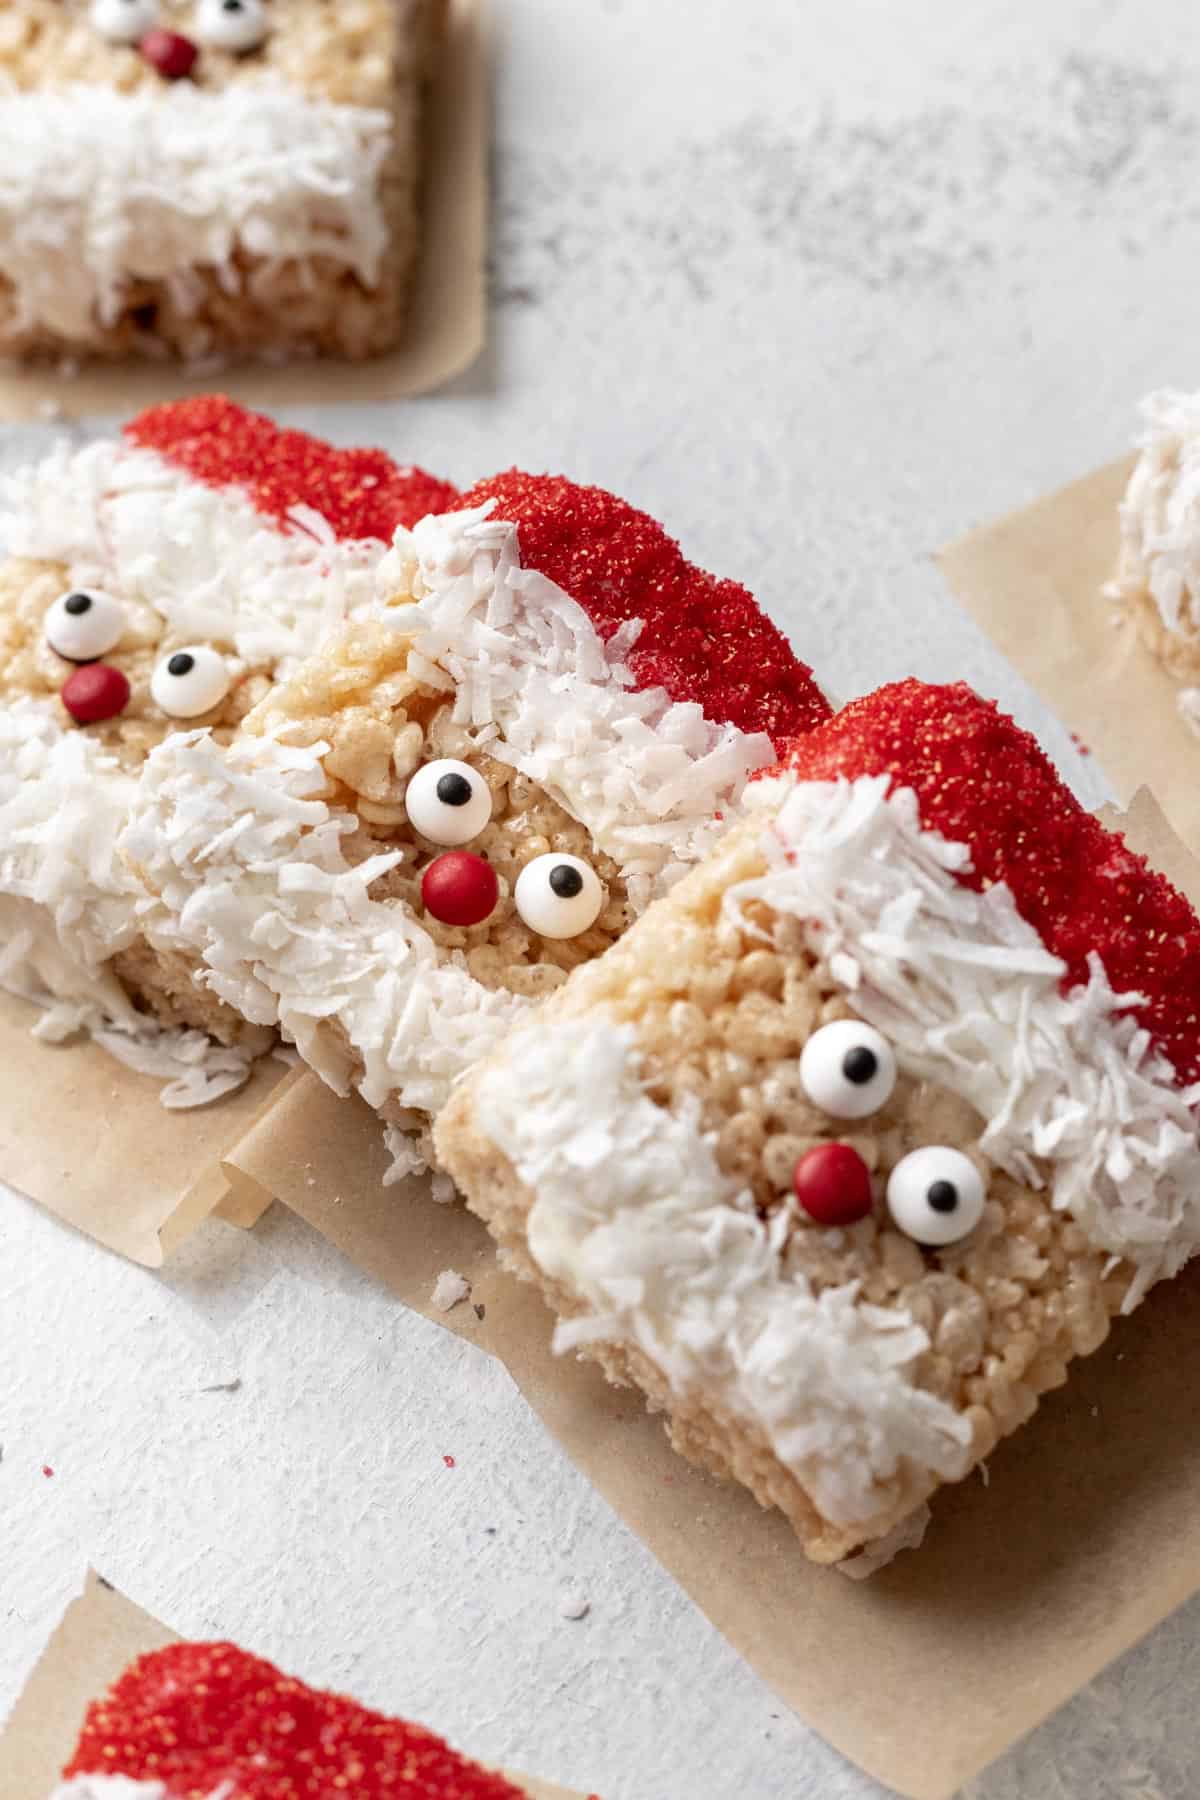 Santa rice krispie treats lined up to show their red candy noses and coconut beards.